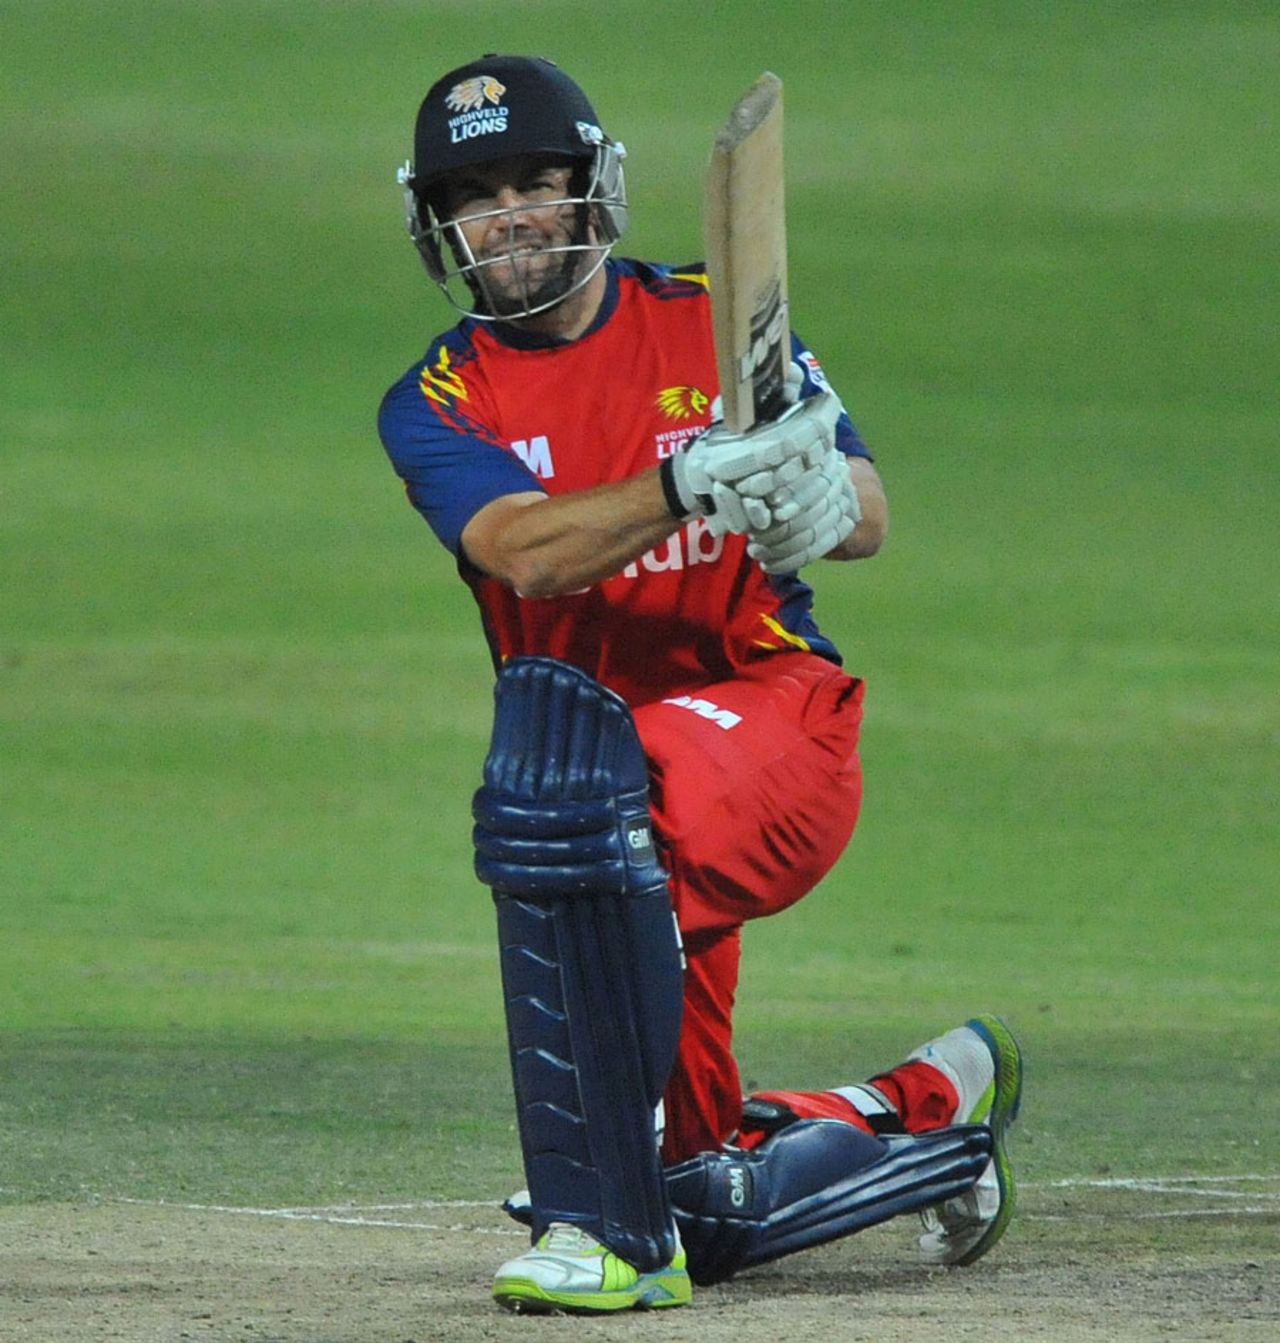 Neil McKenzie top scored with 68 off 41 deliveries, Lions v Mumbai Indians, Group B, Champions League Twenty20, Johannesburg, October 14, 2012